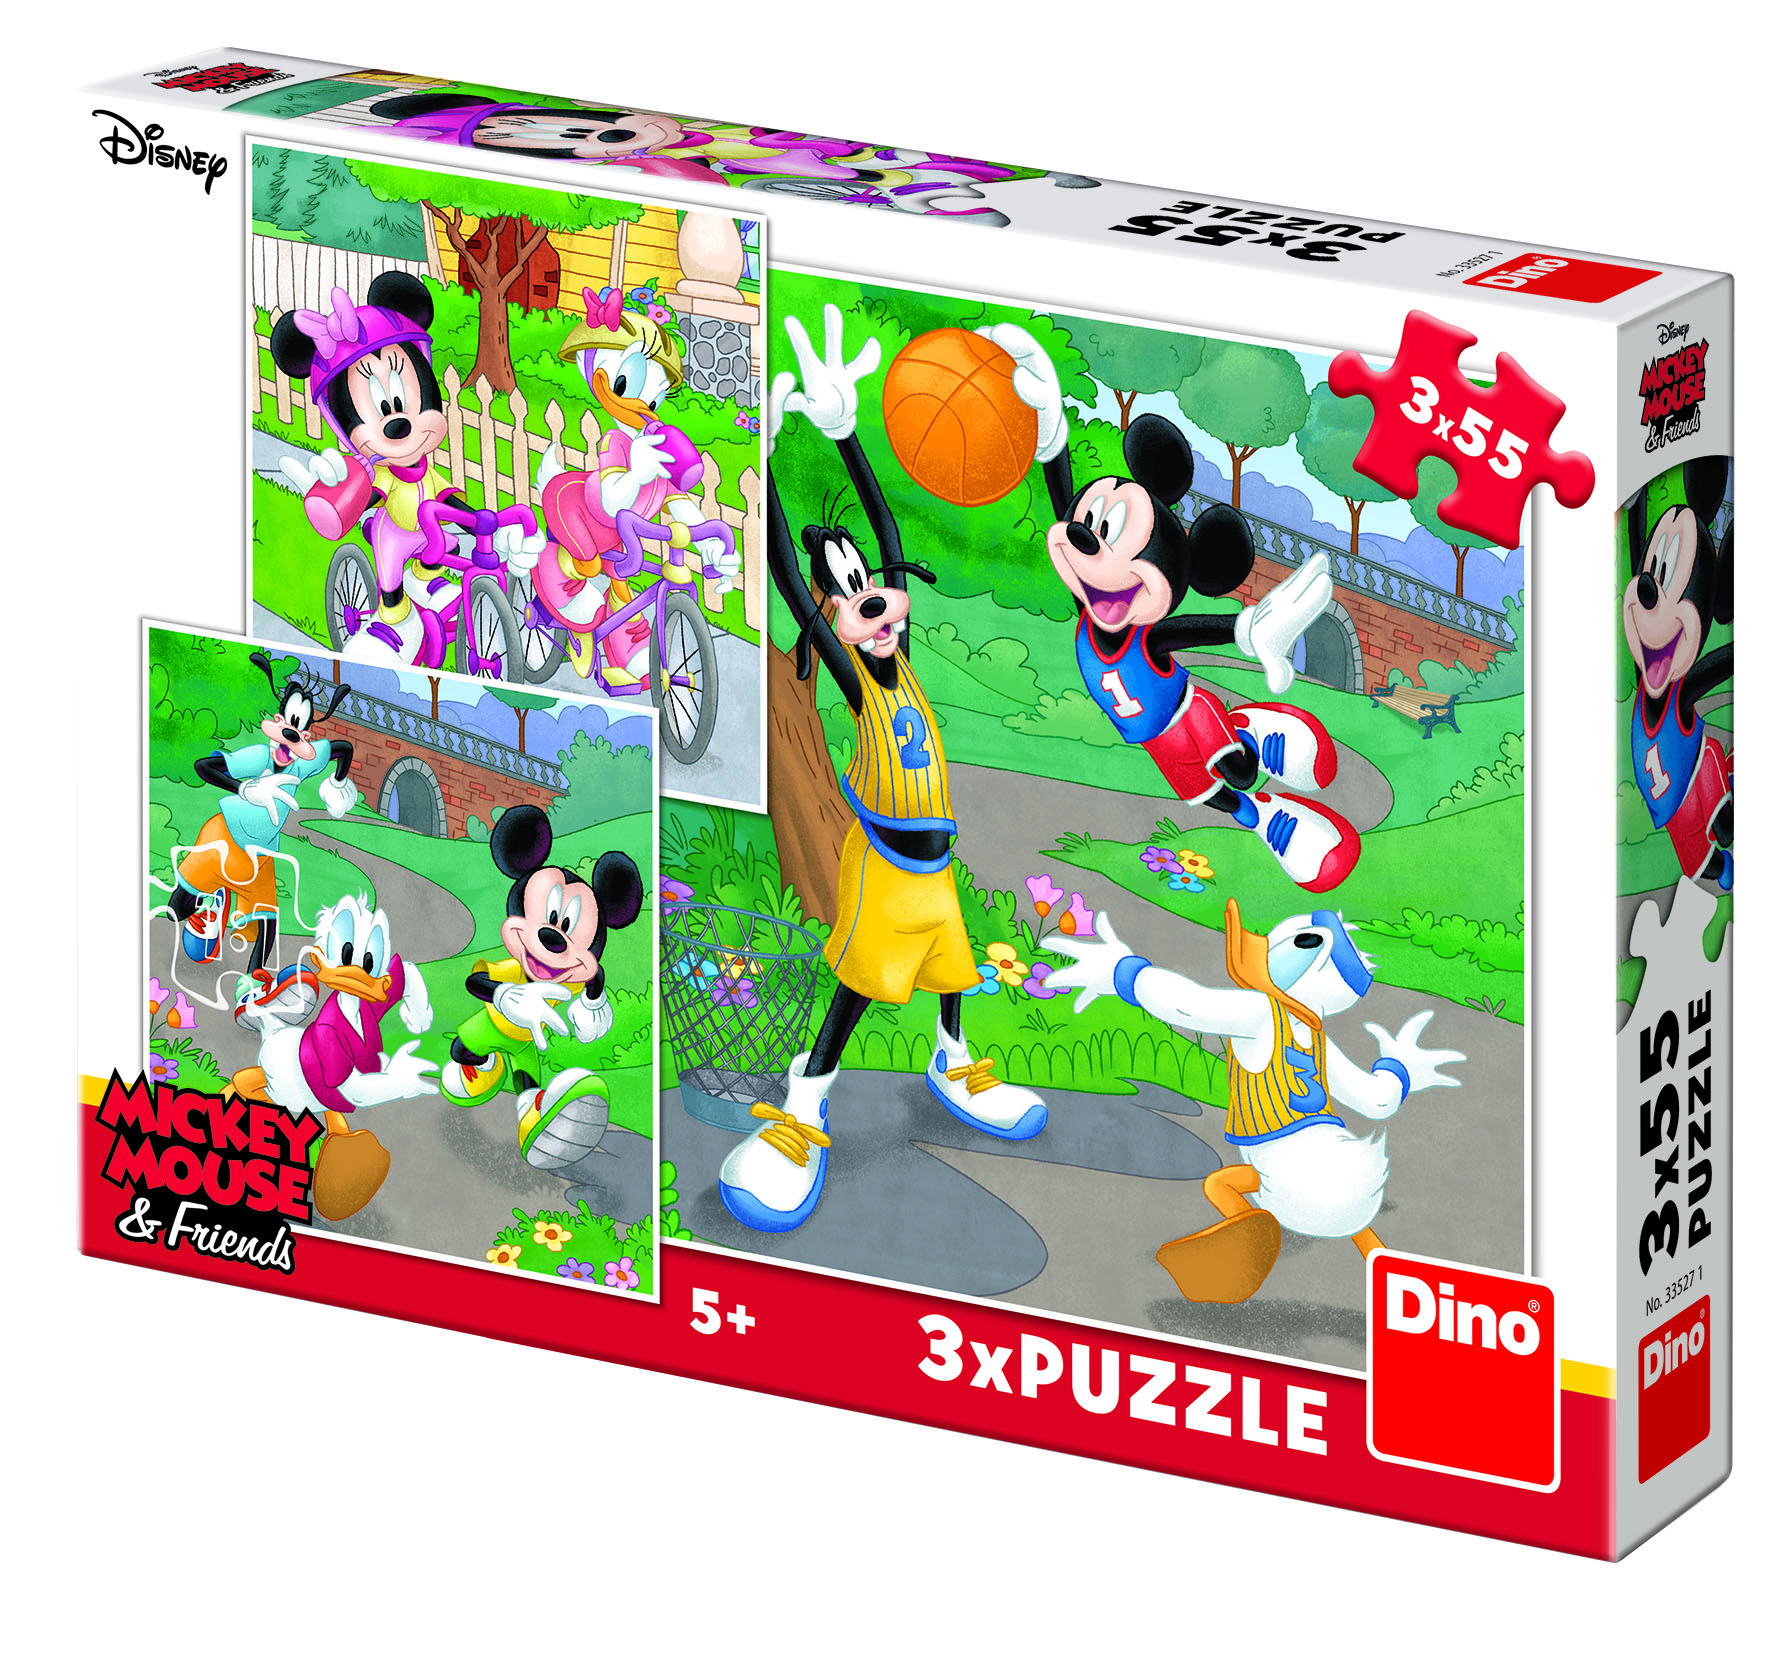 3 Puzzles - Mickey Dino-33527 55 pièces Puzzles - Mickey et Minnie - Puzzle .fr/Planet'Puzzles